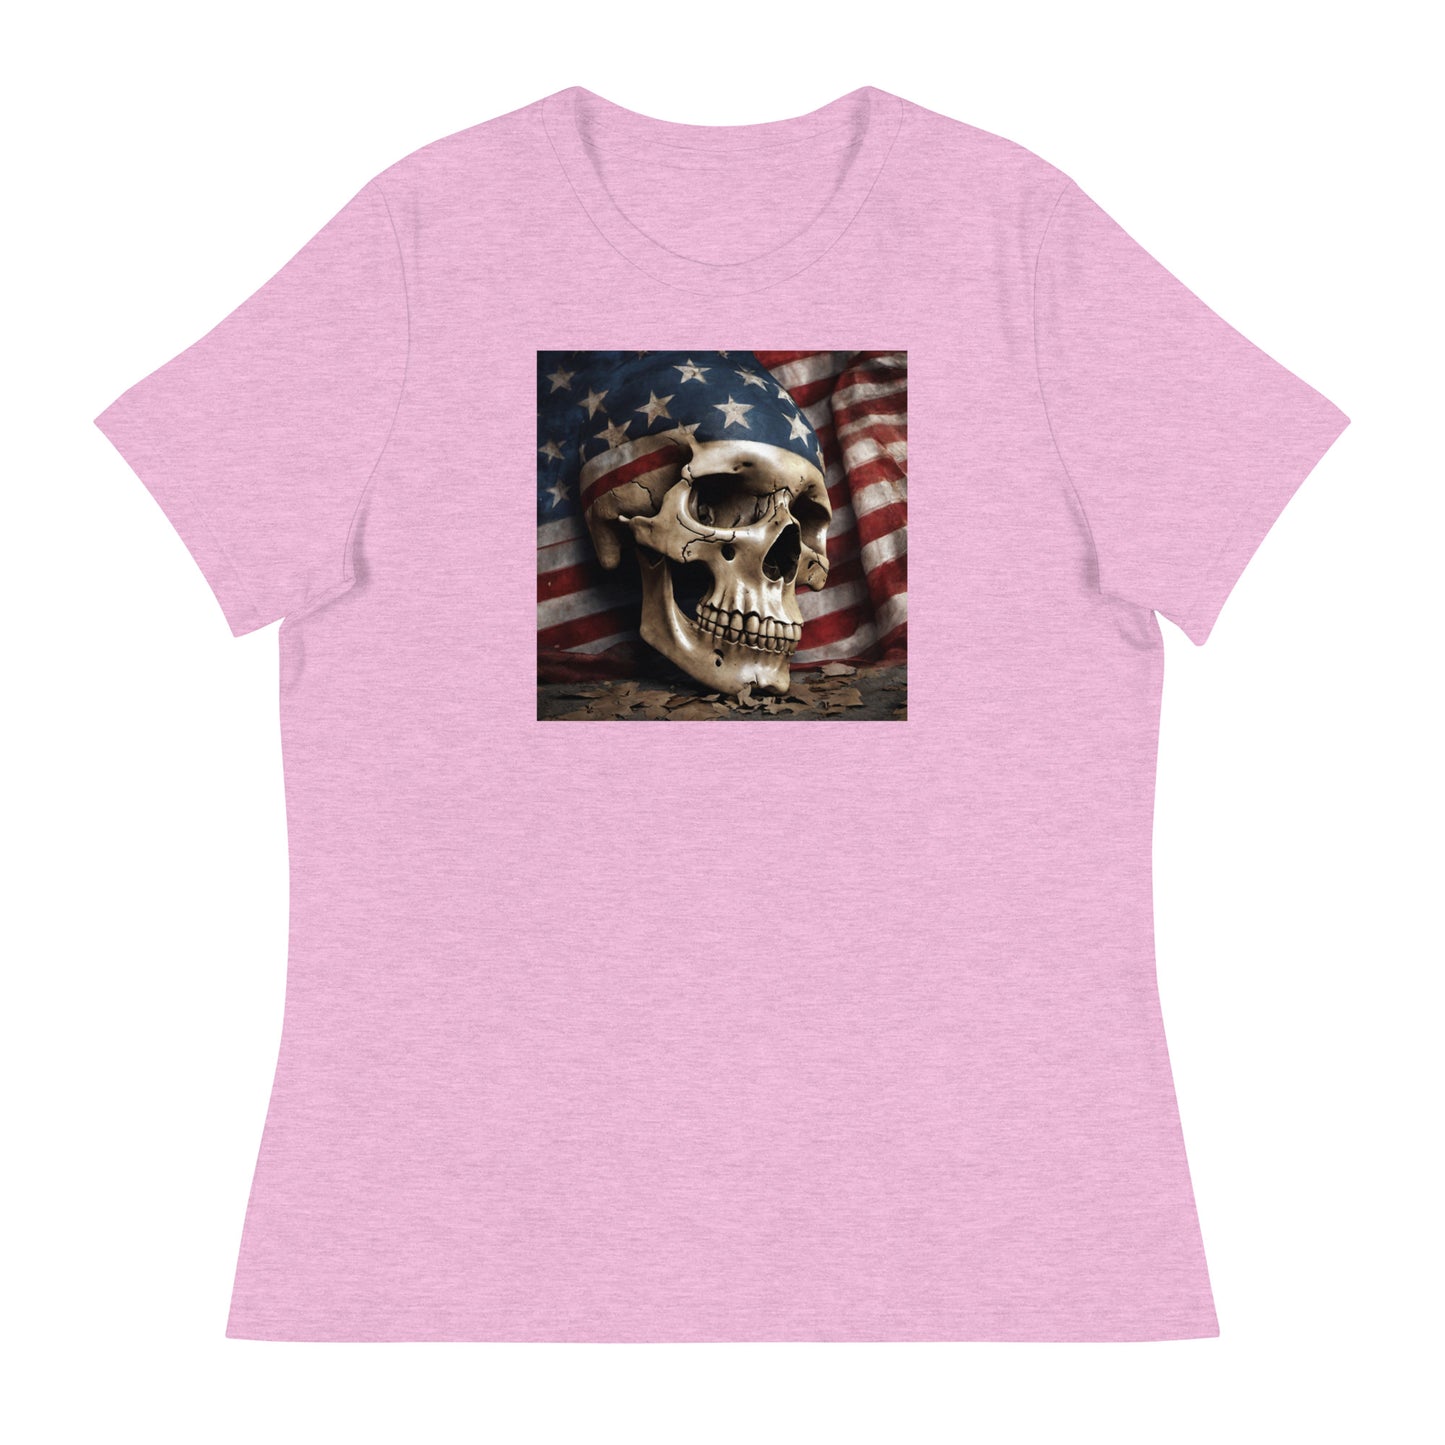 Skull and Flag Print Women's T-Shirt Heather Prism Lilac